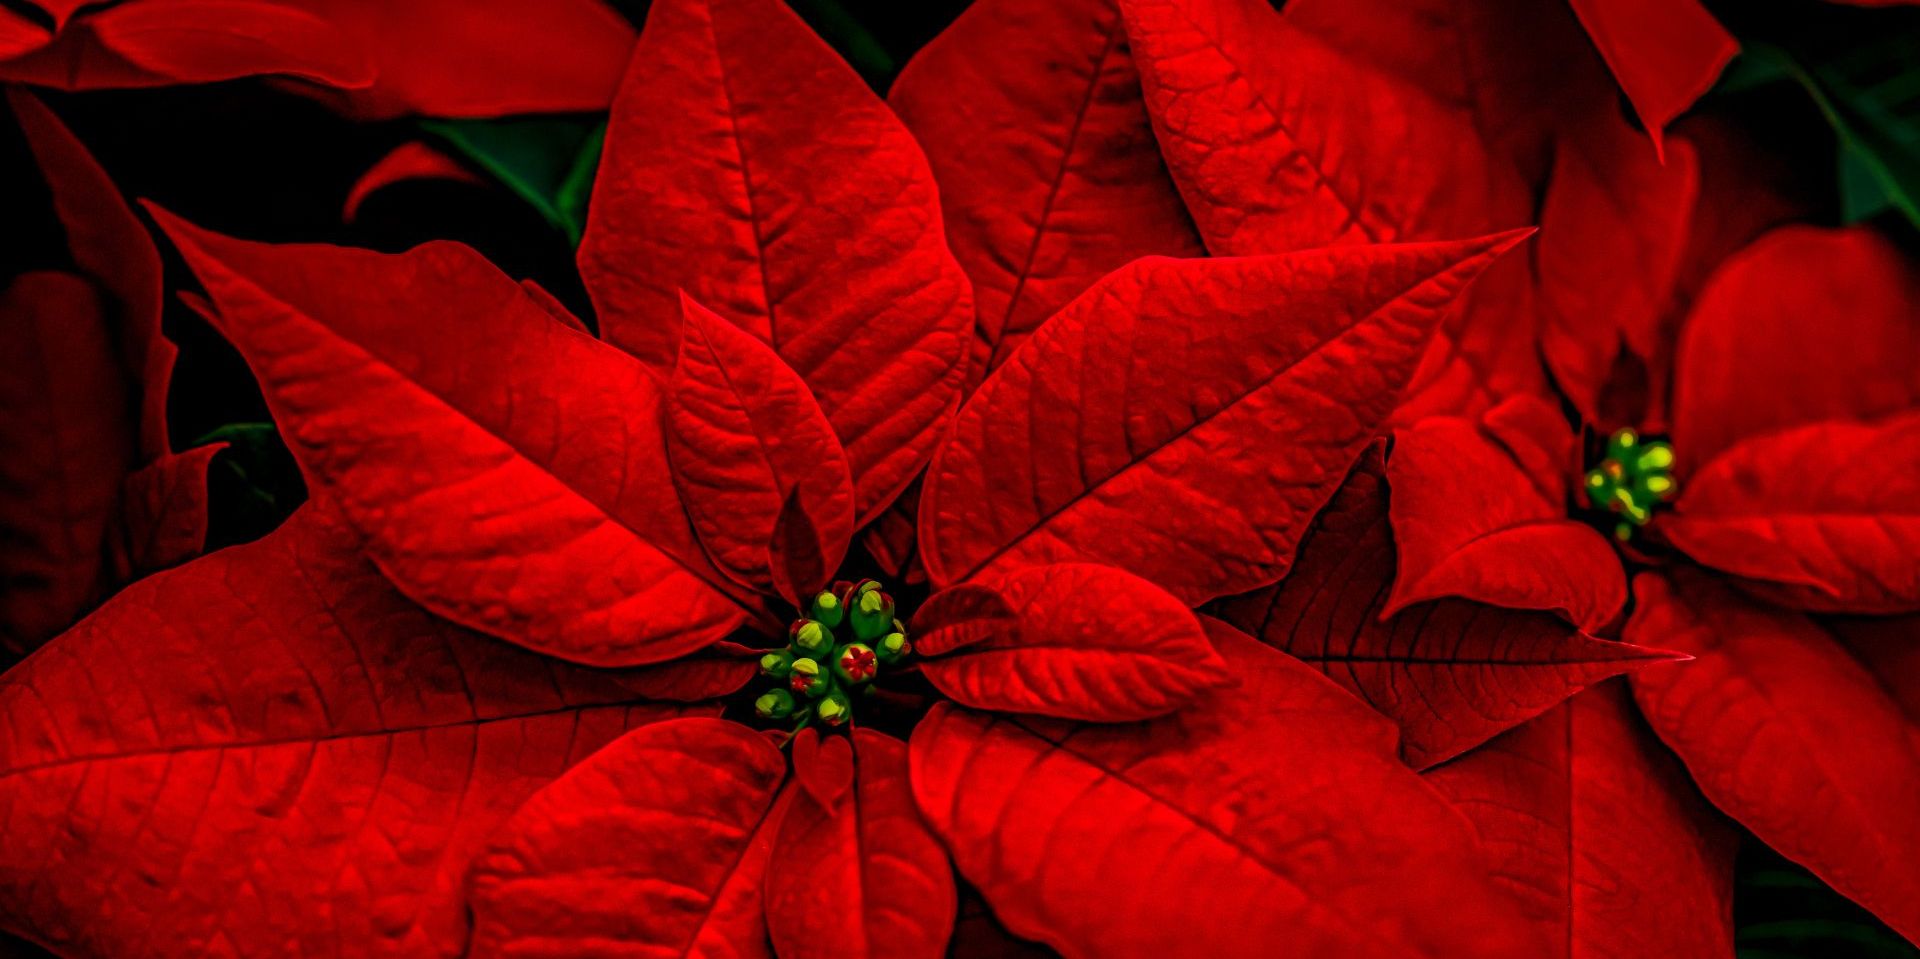 Lil' Sprouts: Poinsettias promotional image